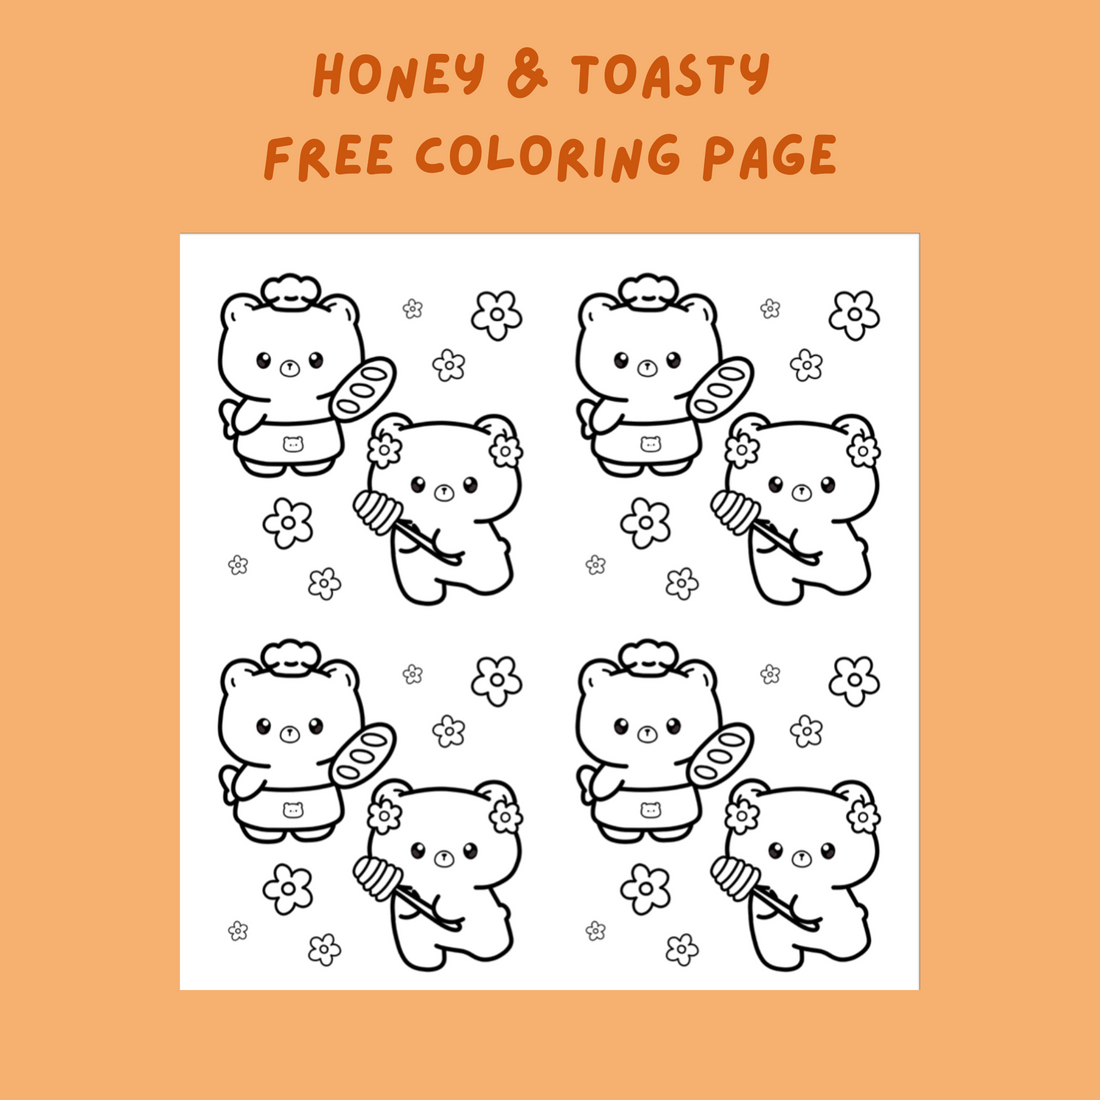 New Honey and Toasty Coloring Page!